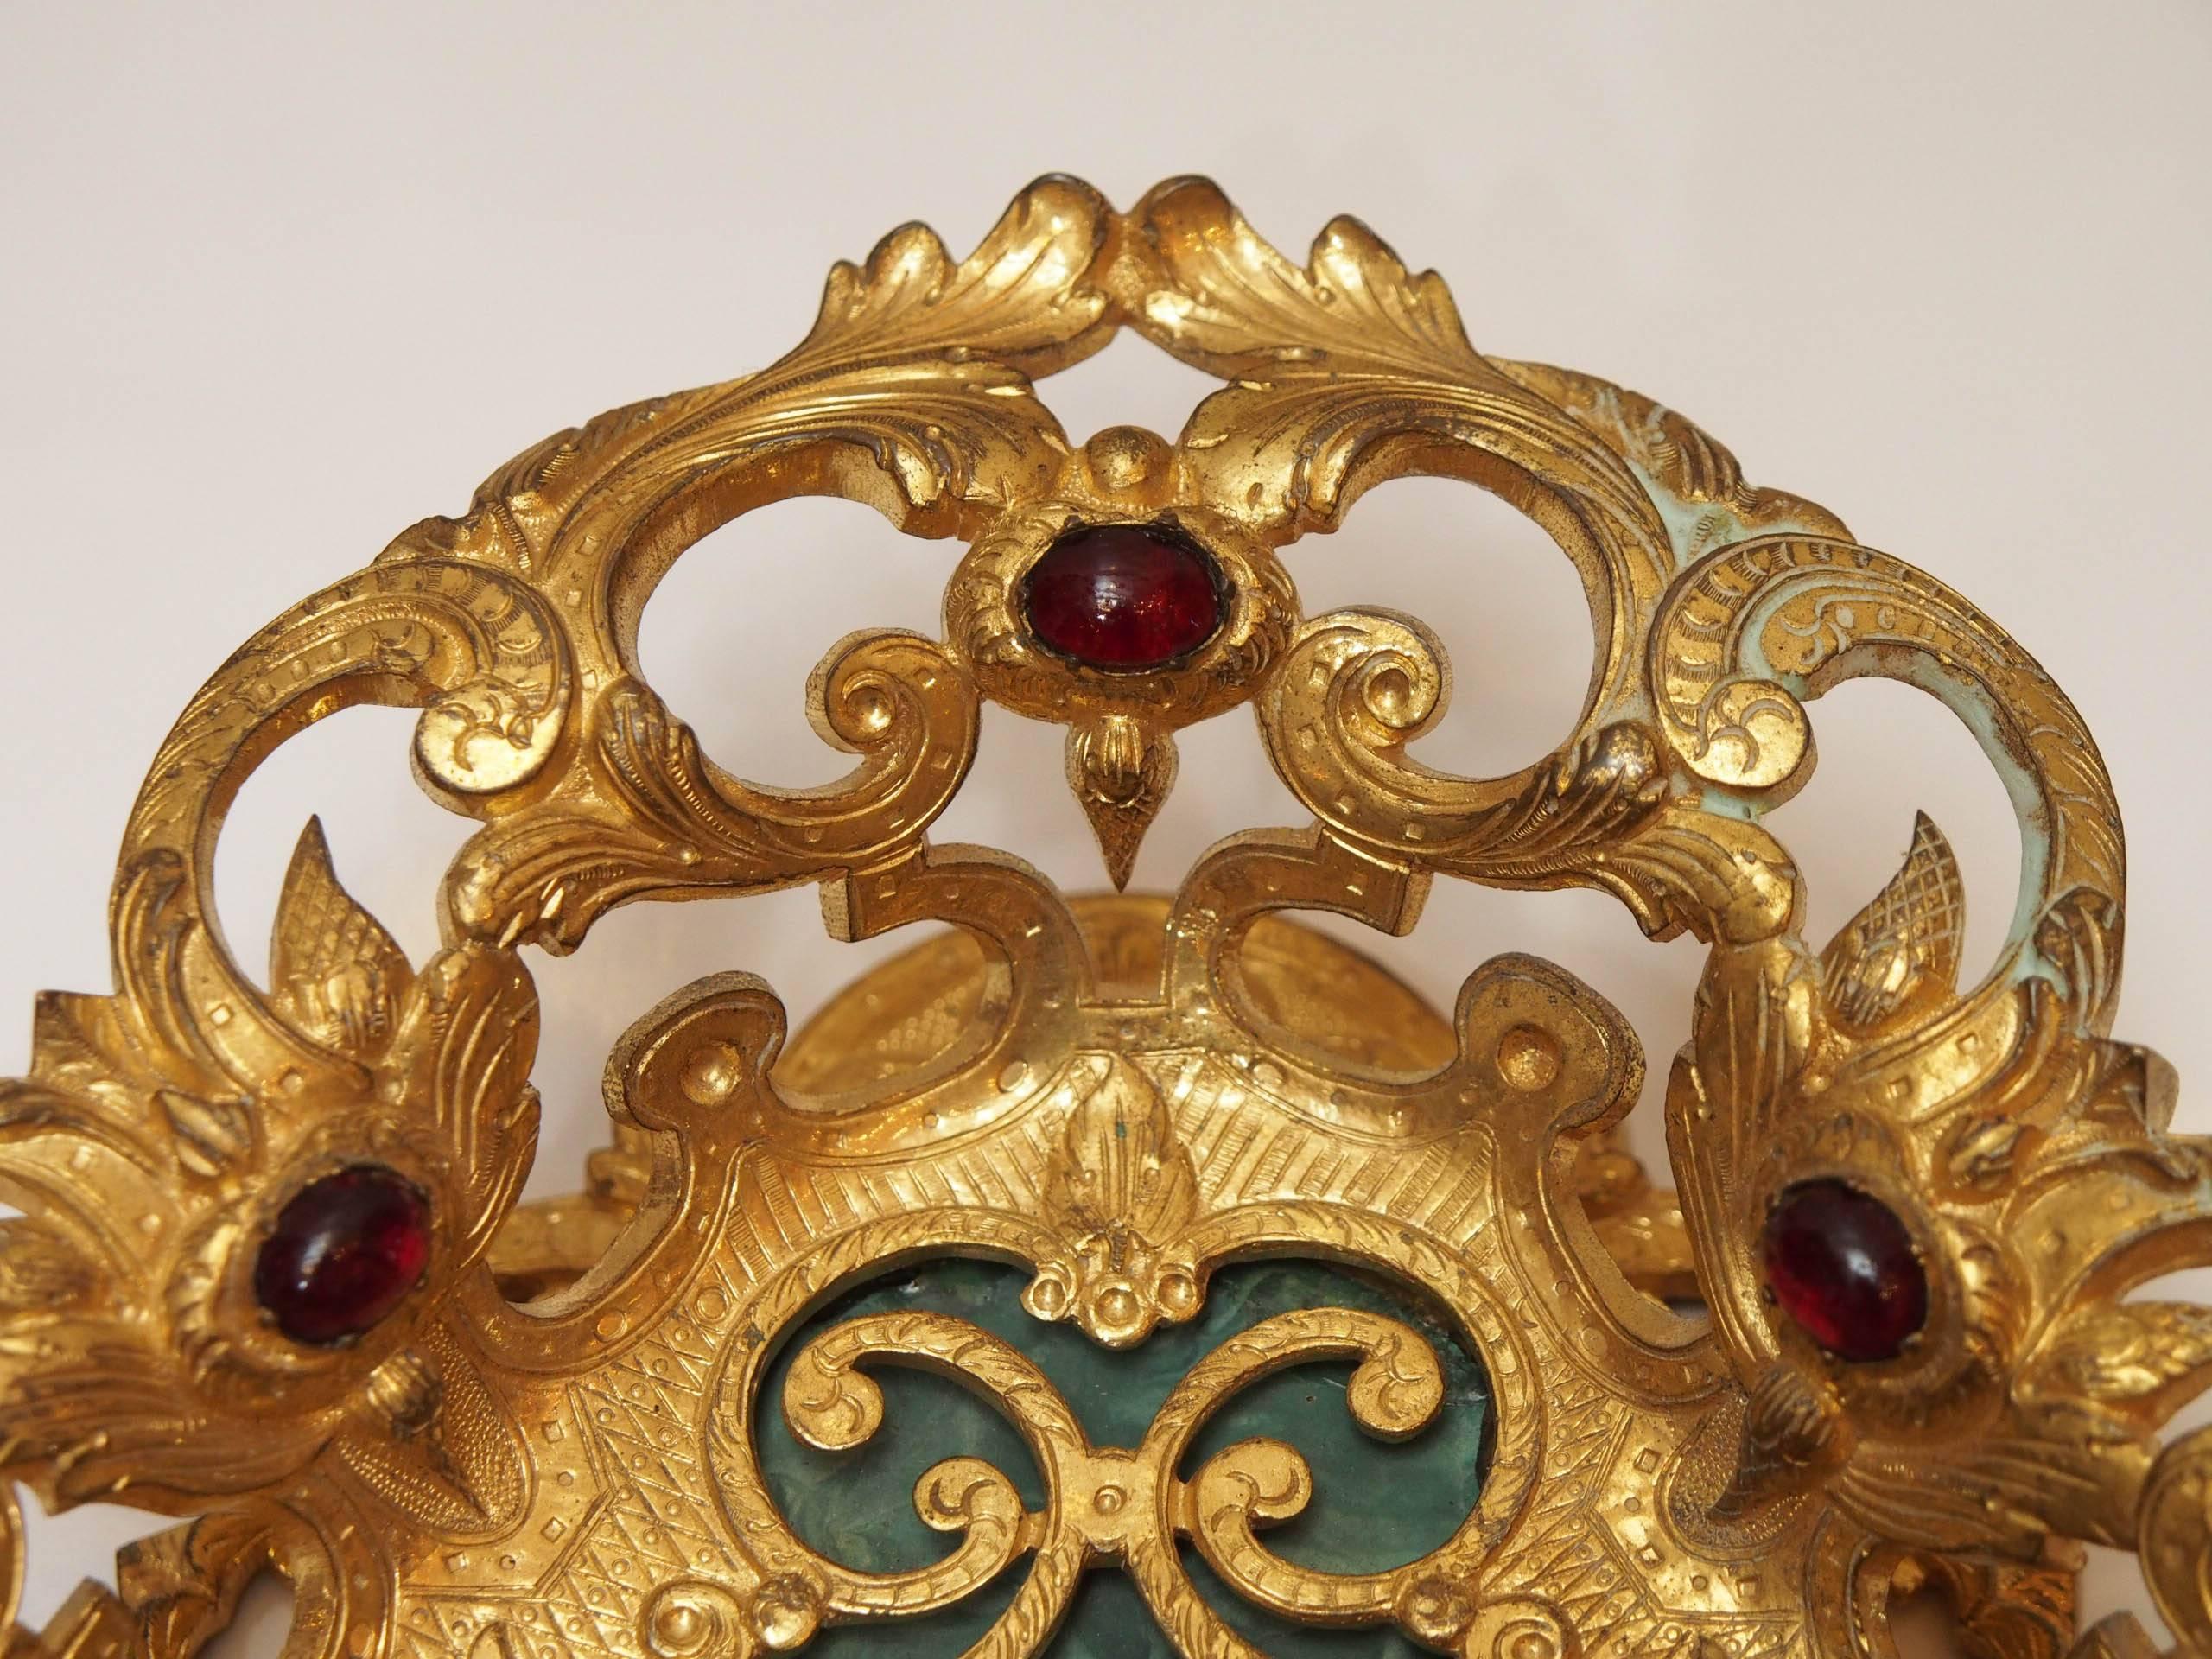 19th Century Italian Gilt Bronze and Jeweled with Malachite Base Tazza For Sale 3